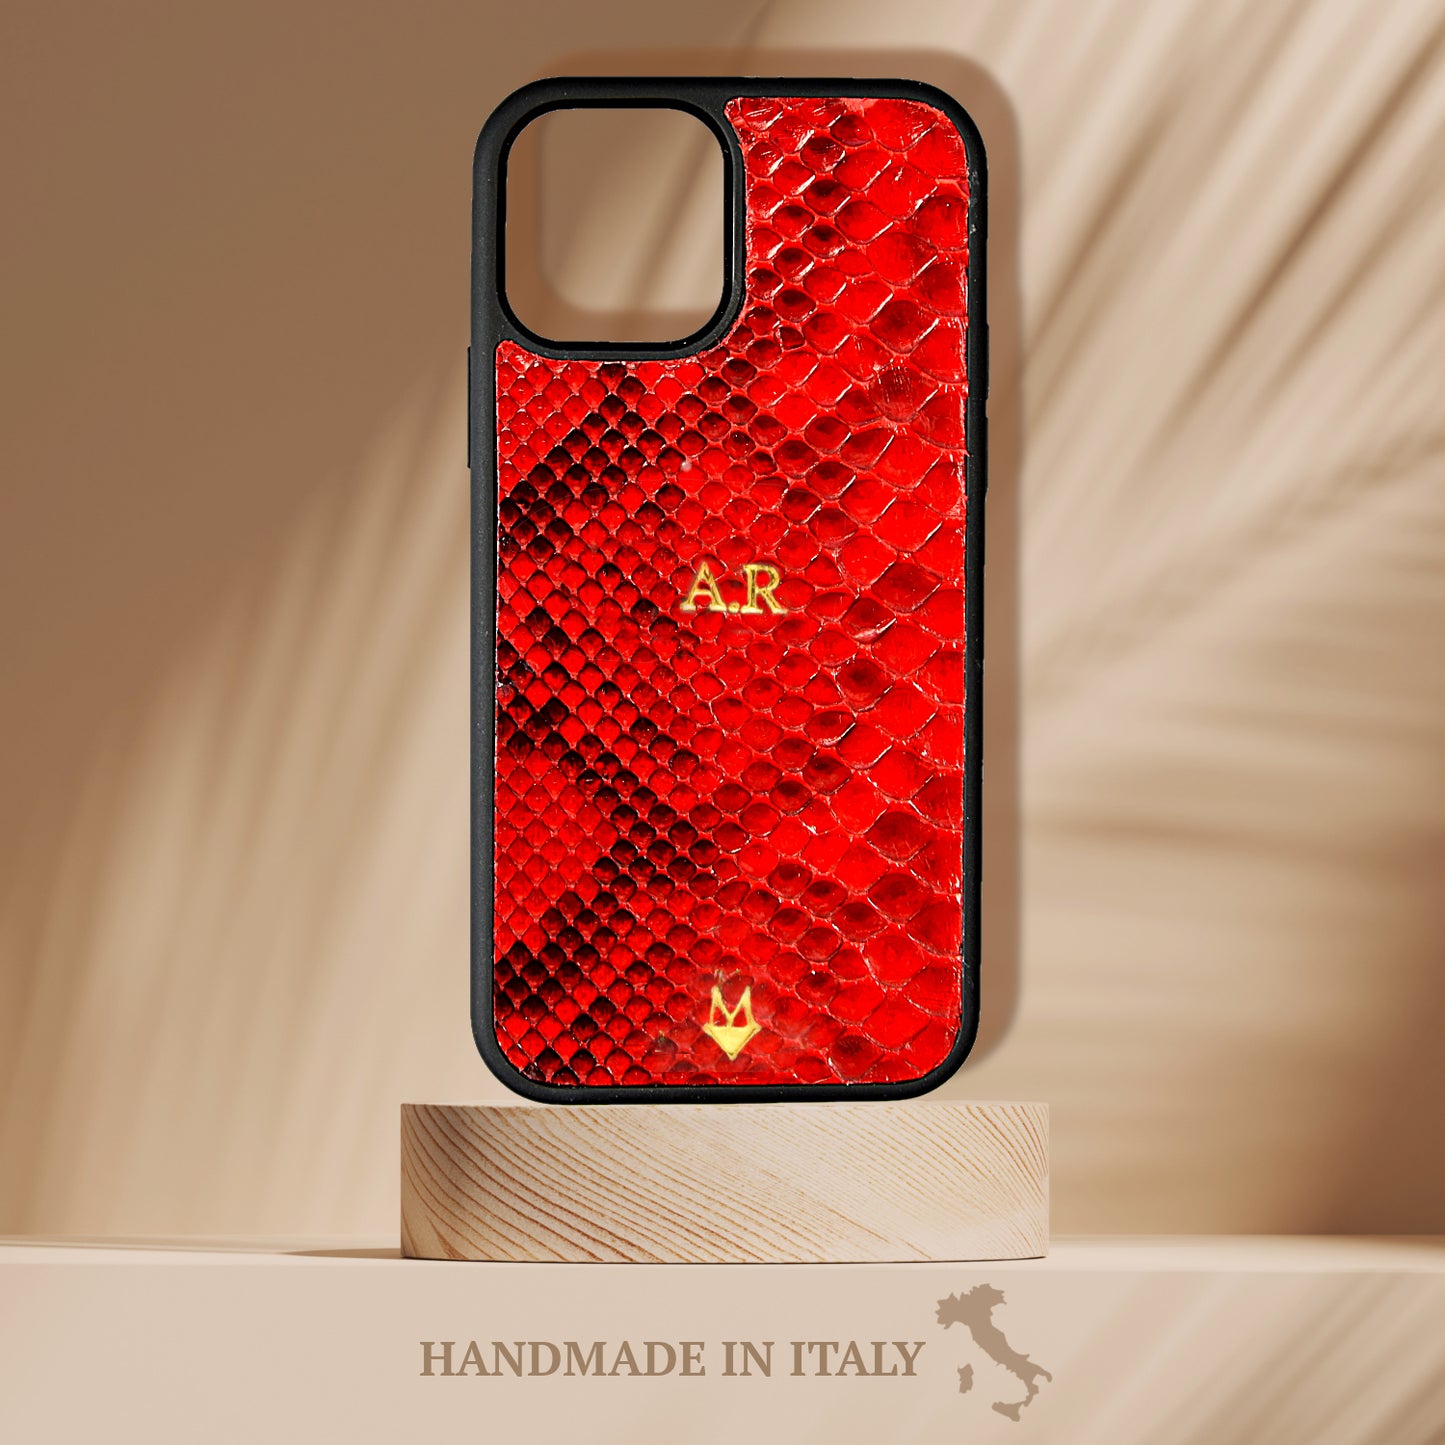 Cover iPhone 12/11 / XR in red python leather – MESPECTA Italia